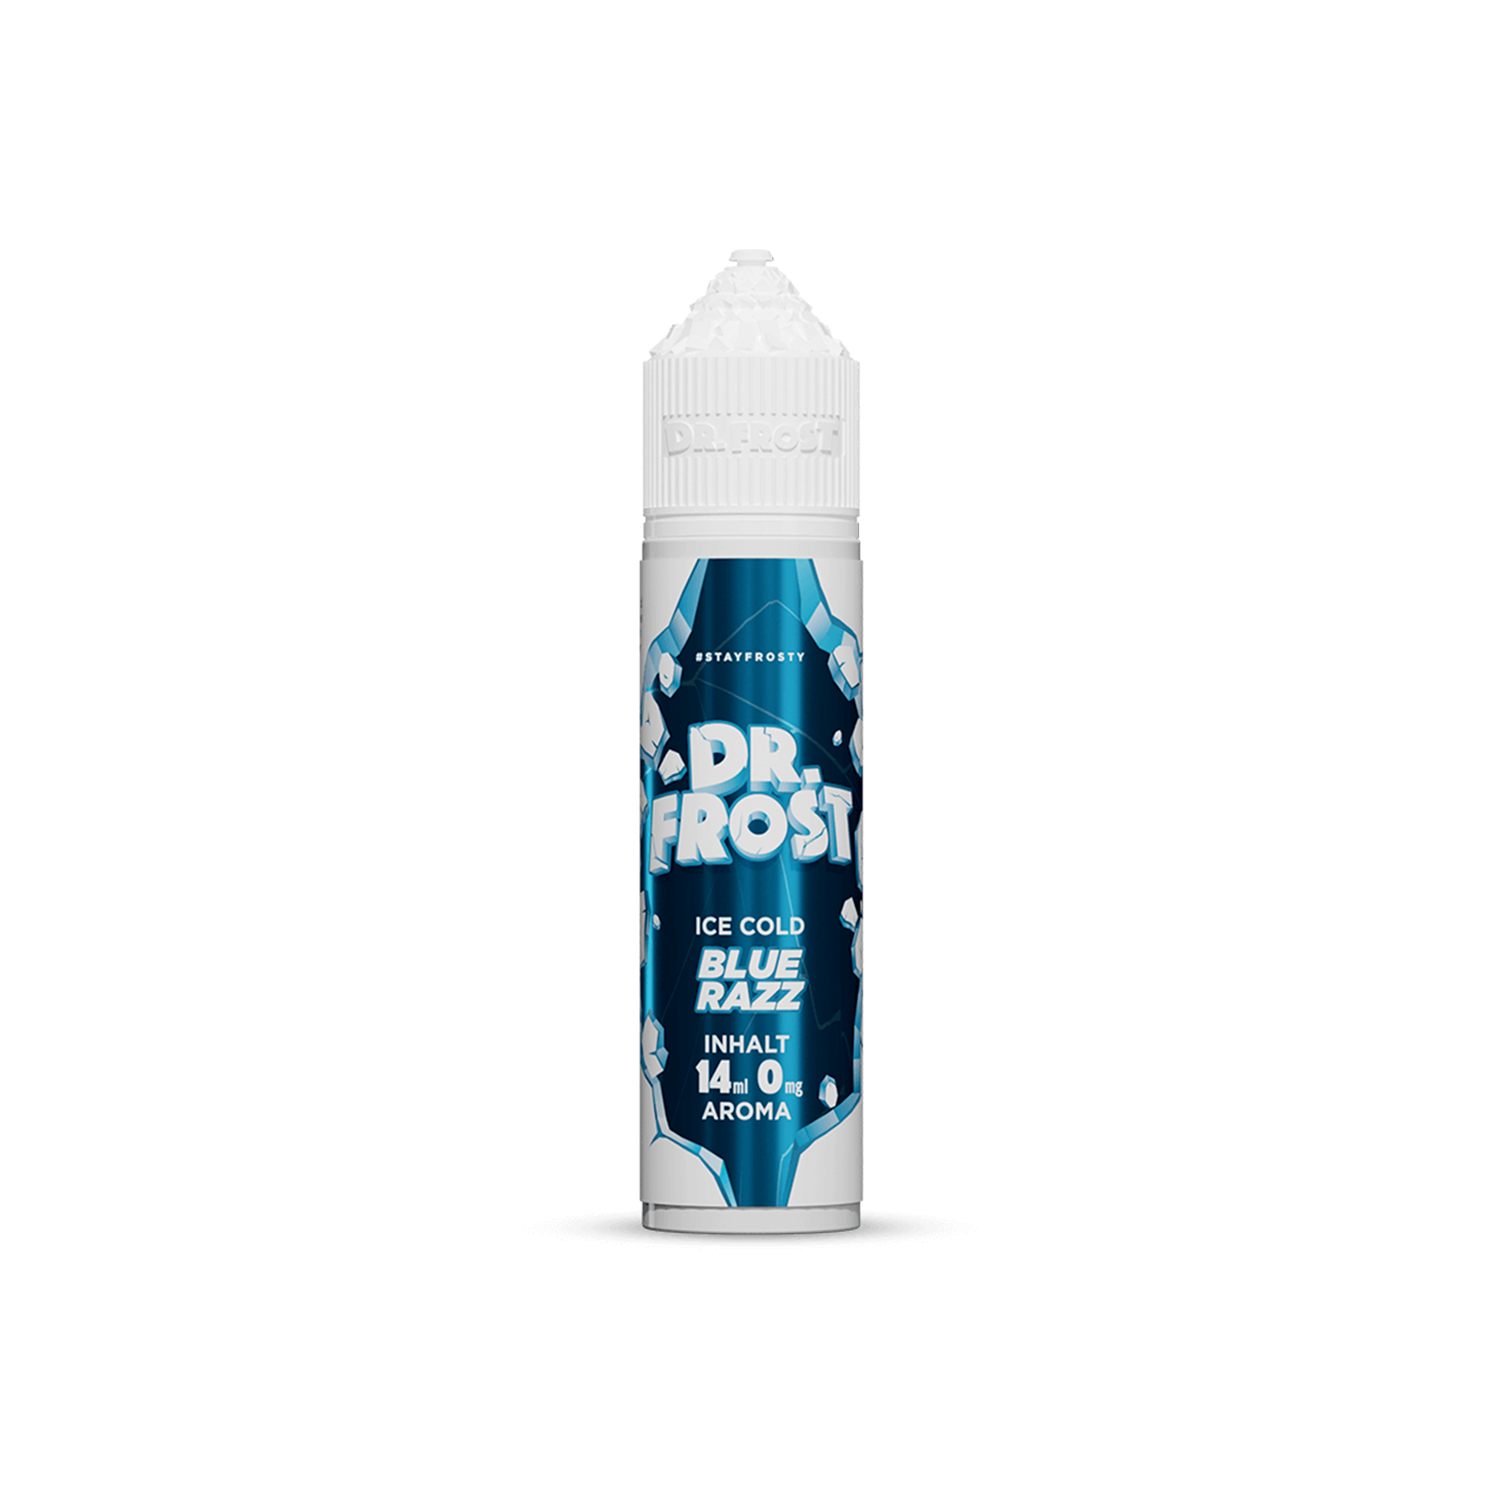 Dr. Frost - Ice Cold - Blue Razz 14 ml Aroma 